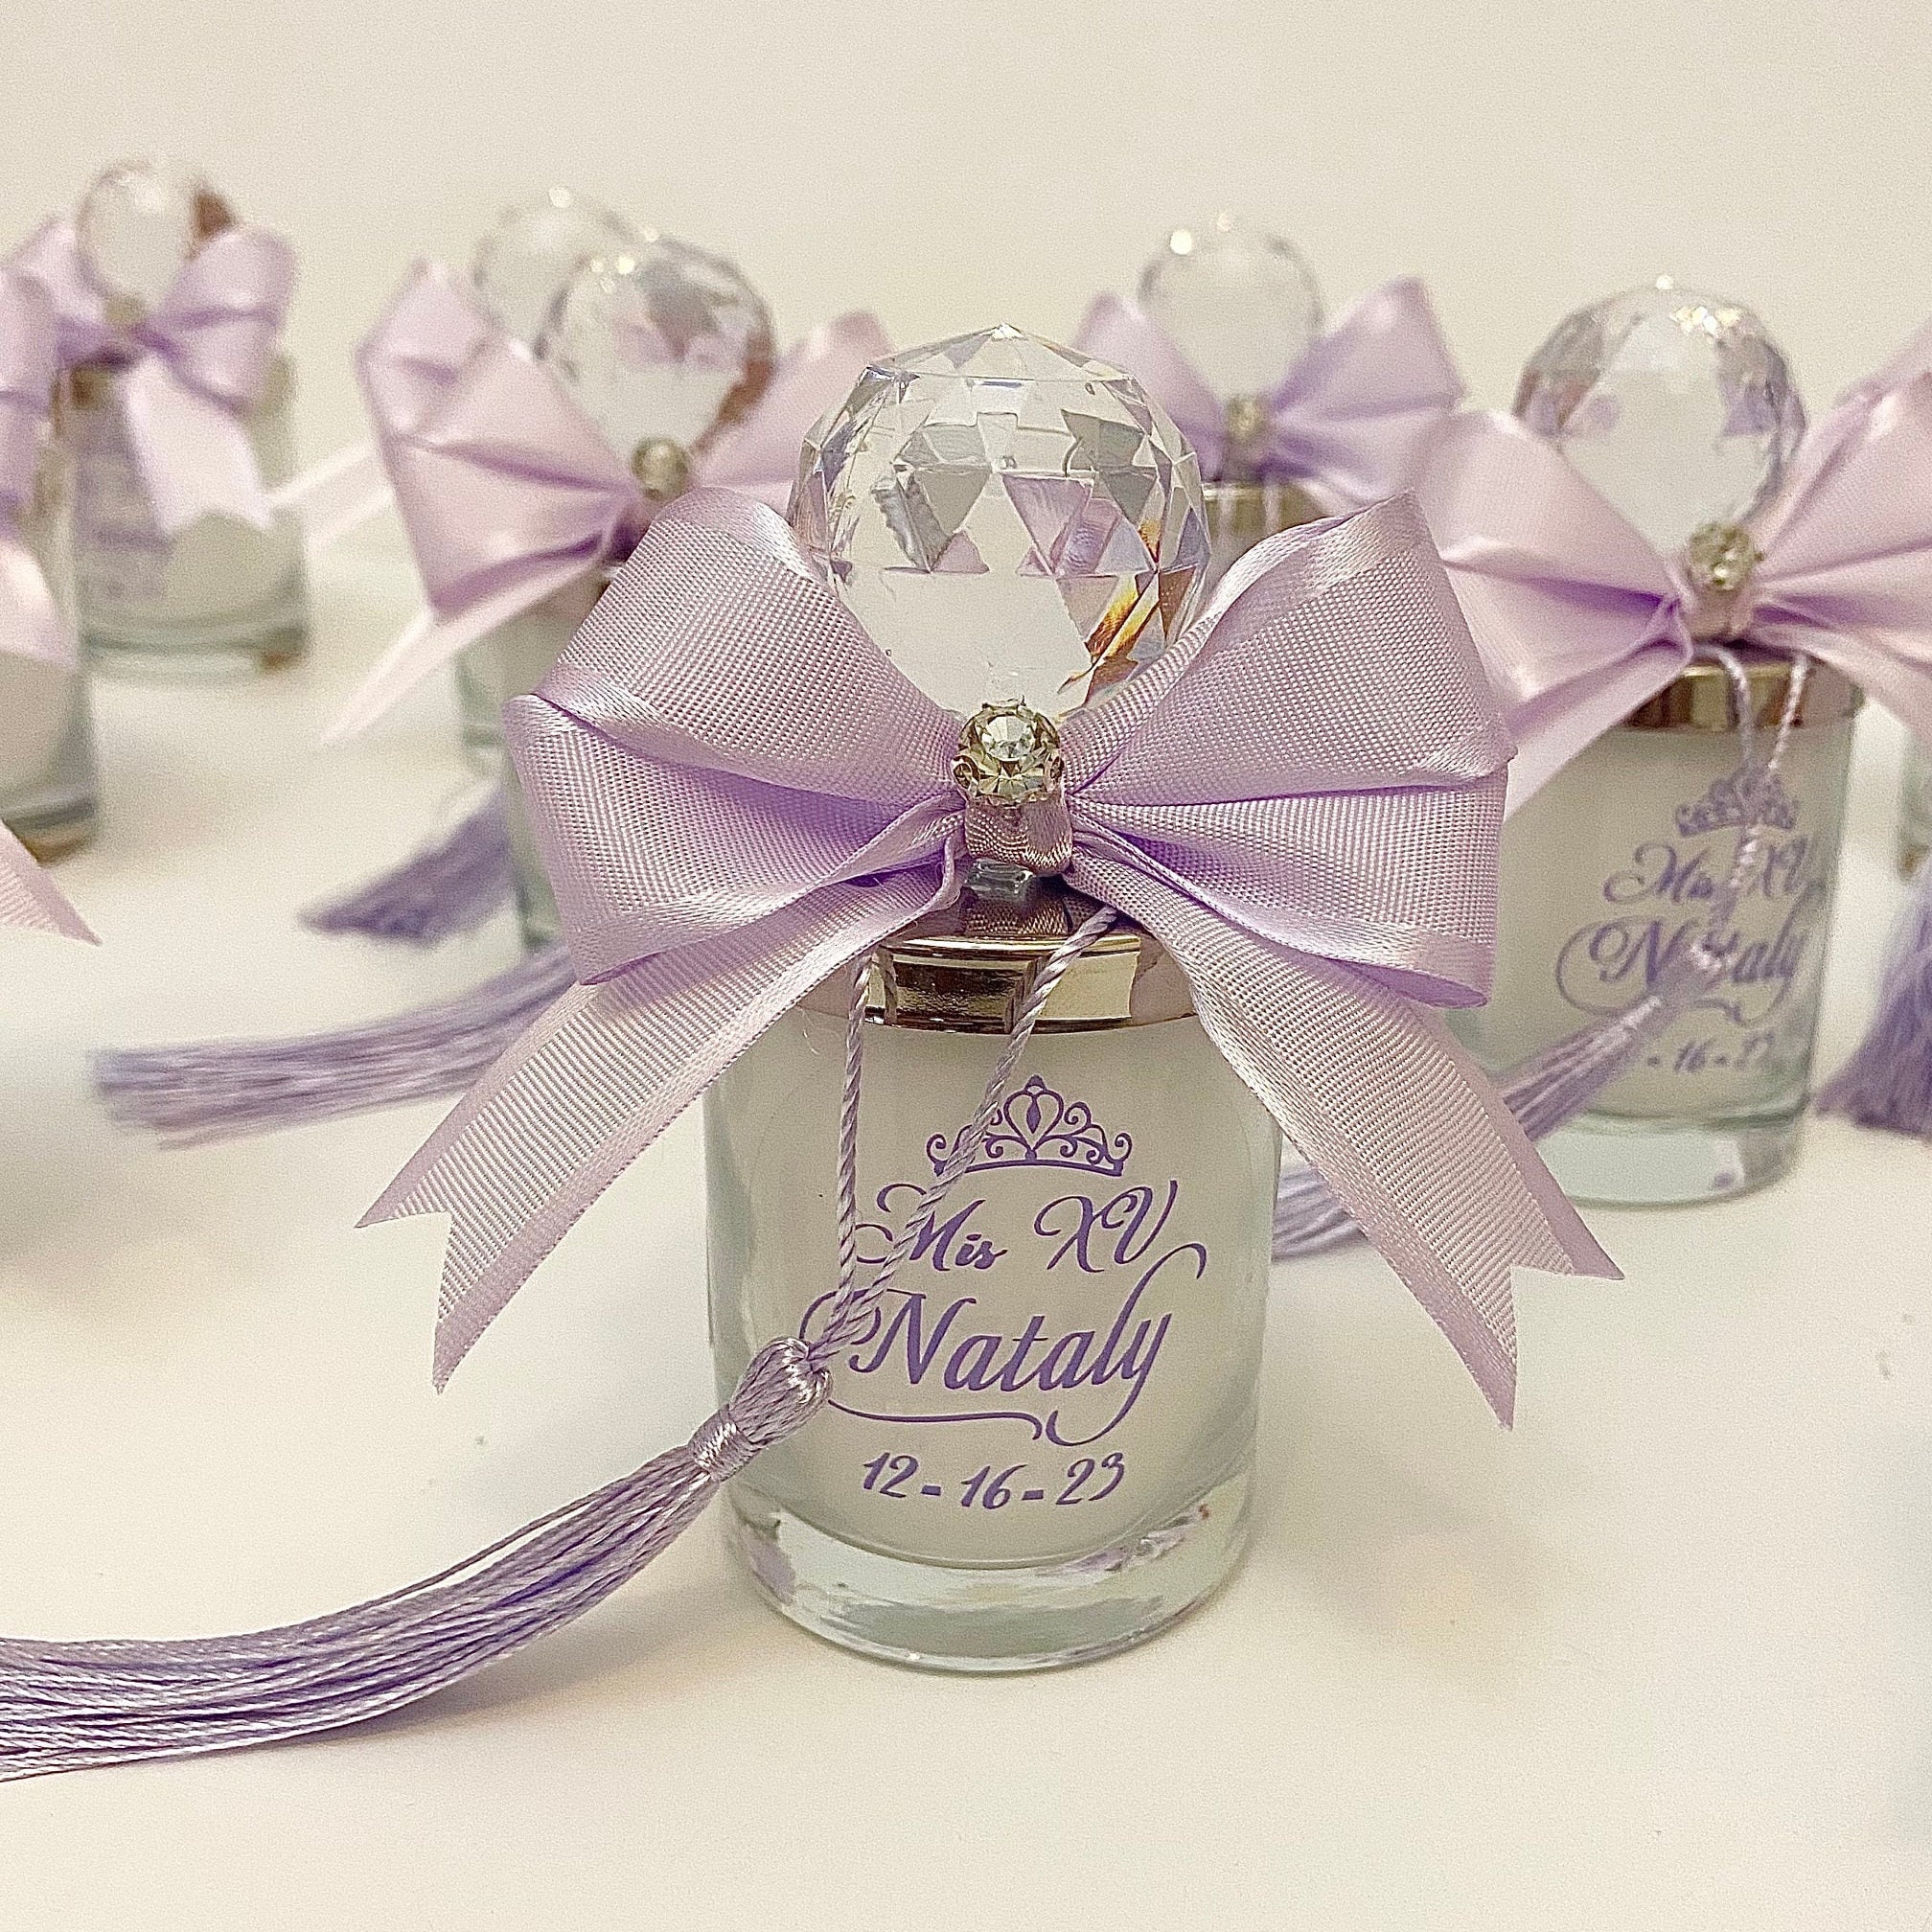 MTLEE 24 Pcs Baby Shower Party Favors Candles Lavender Scented